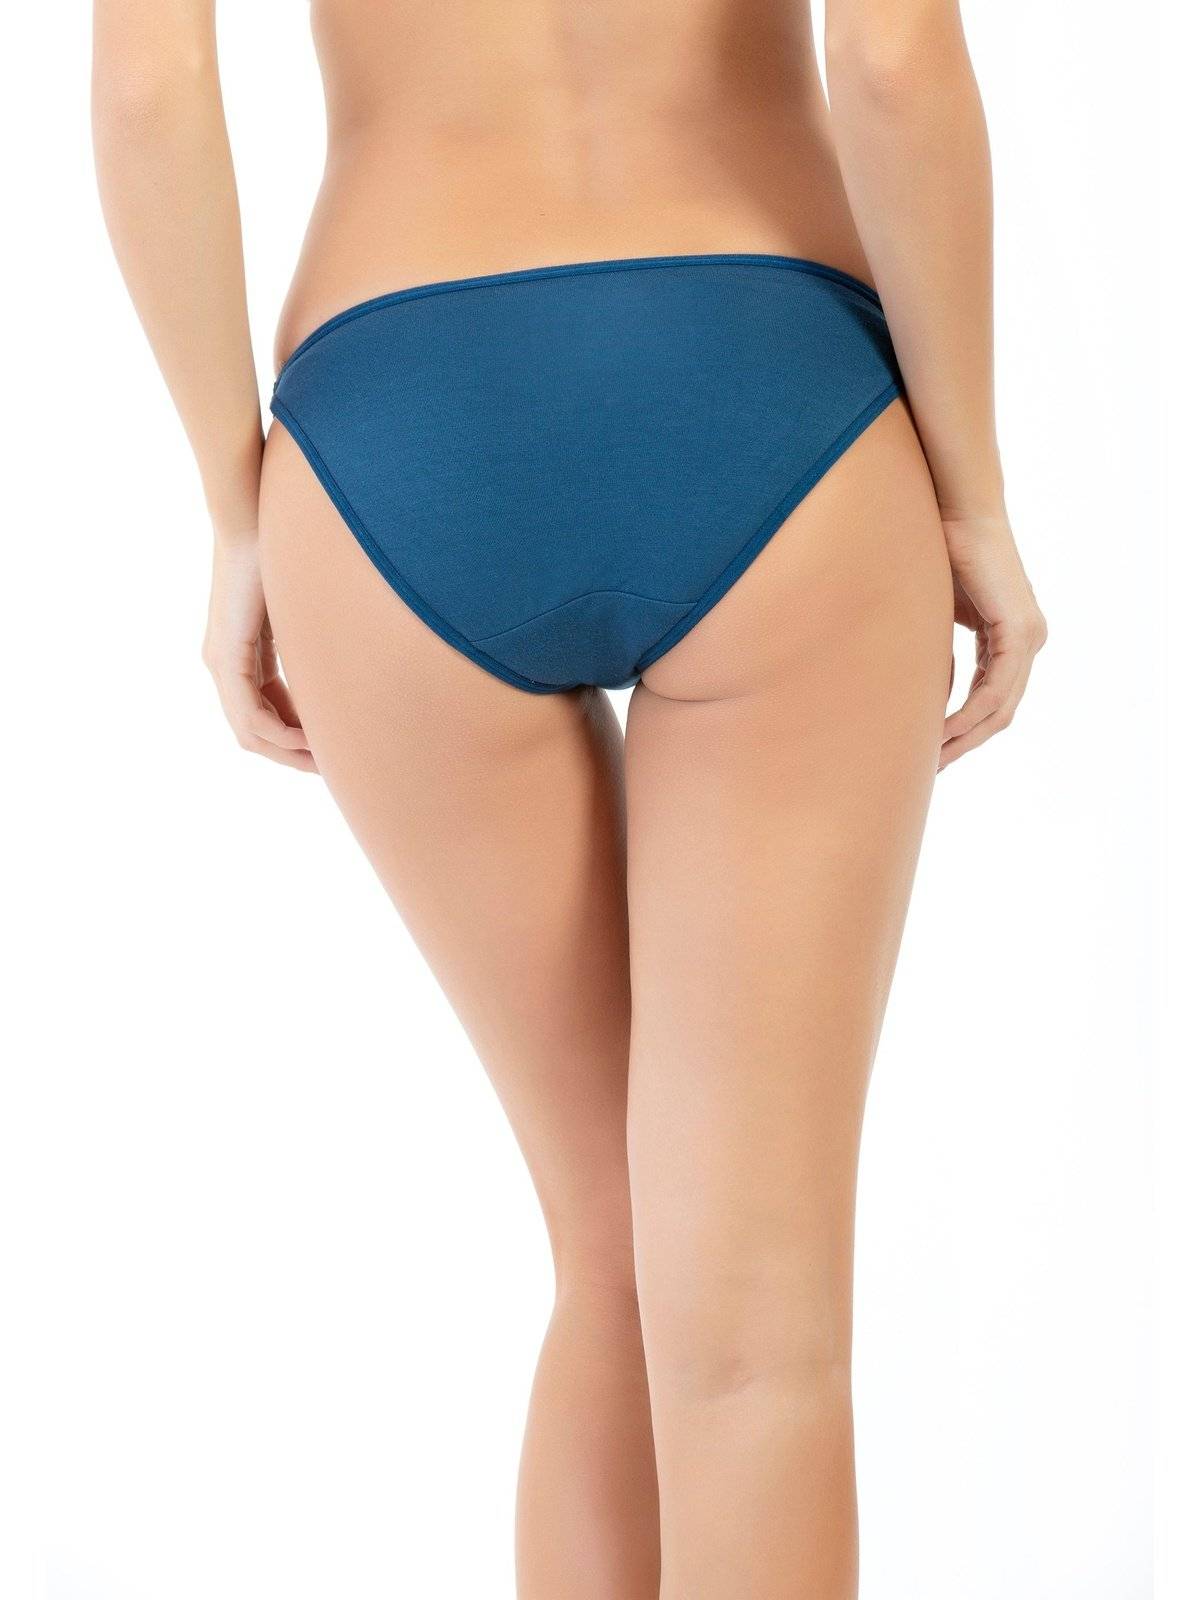 Envie Bikini, Low rise panty, Super Soft Modal fabric for soft touch comfort